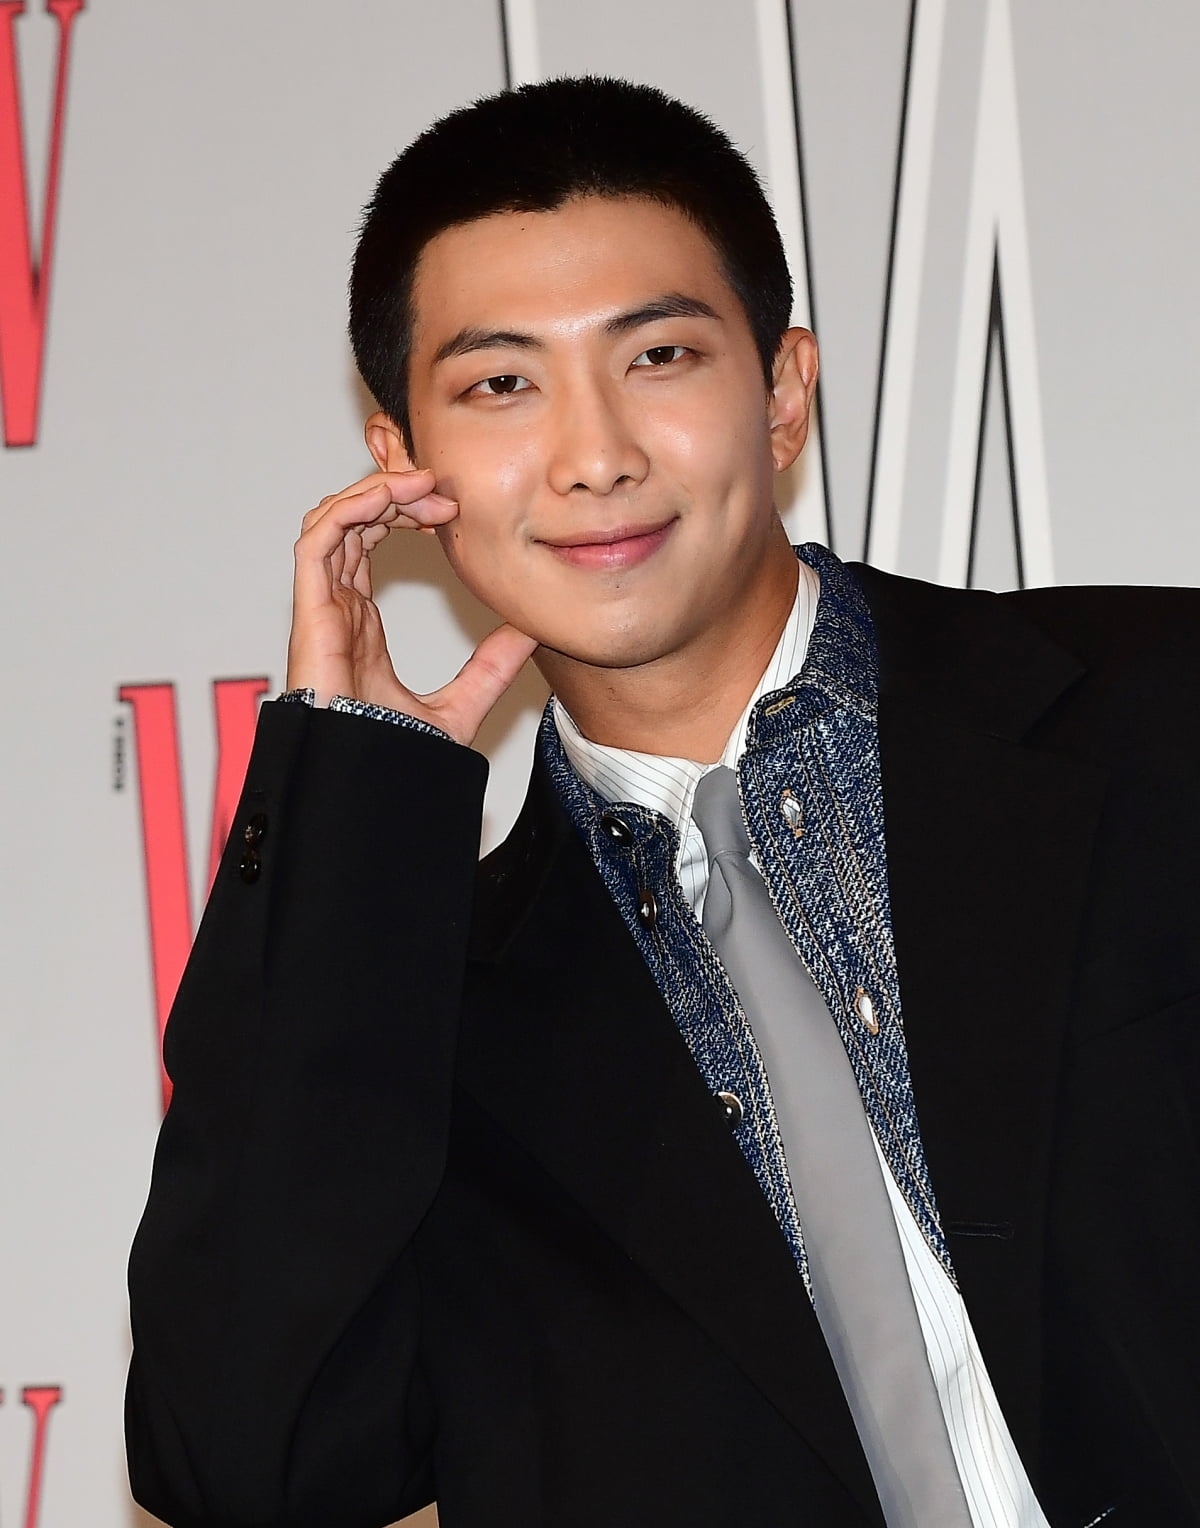 BTS RM's latest news from the military... “Another learning and experience”